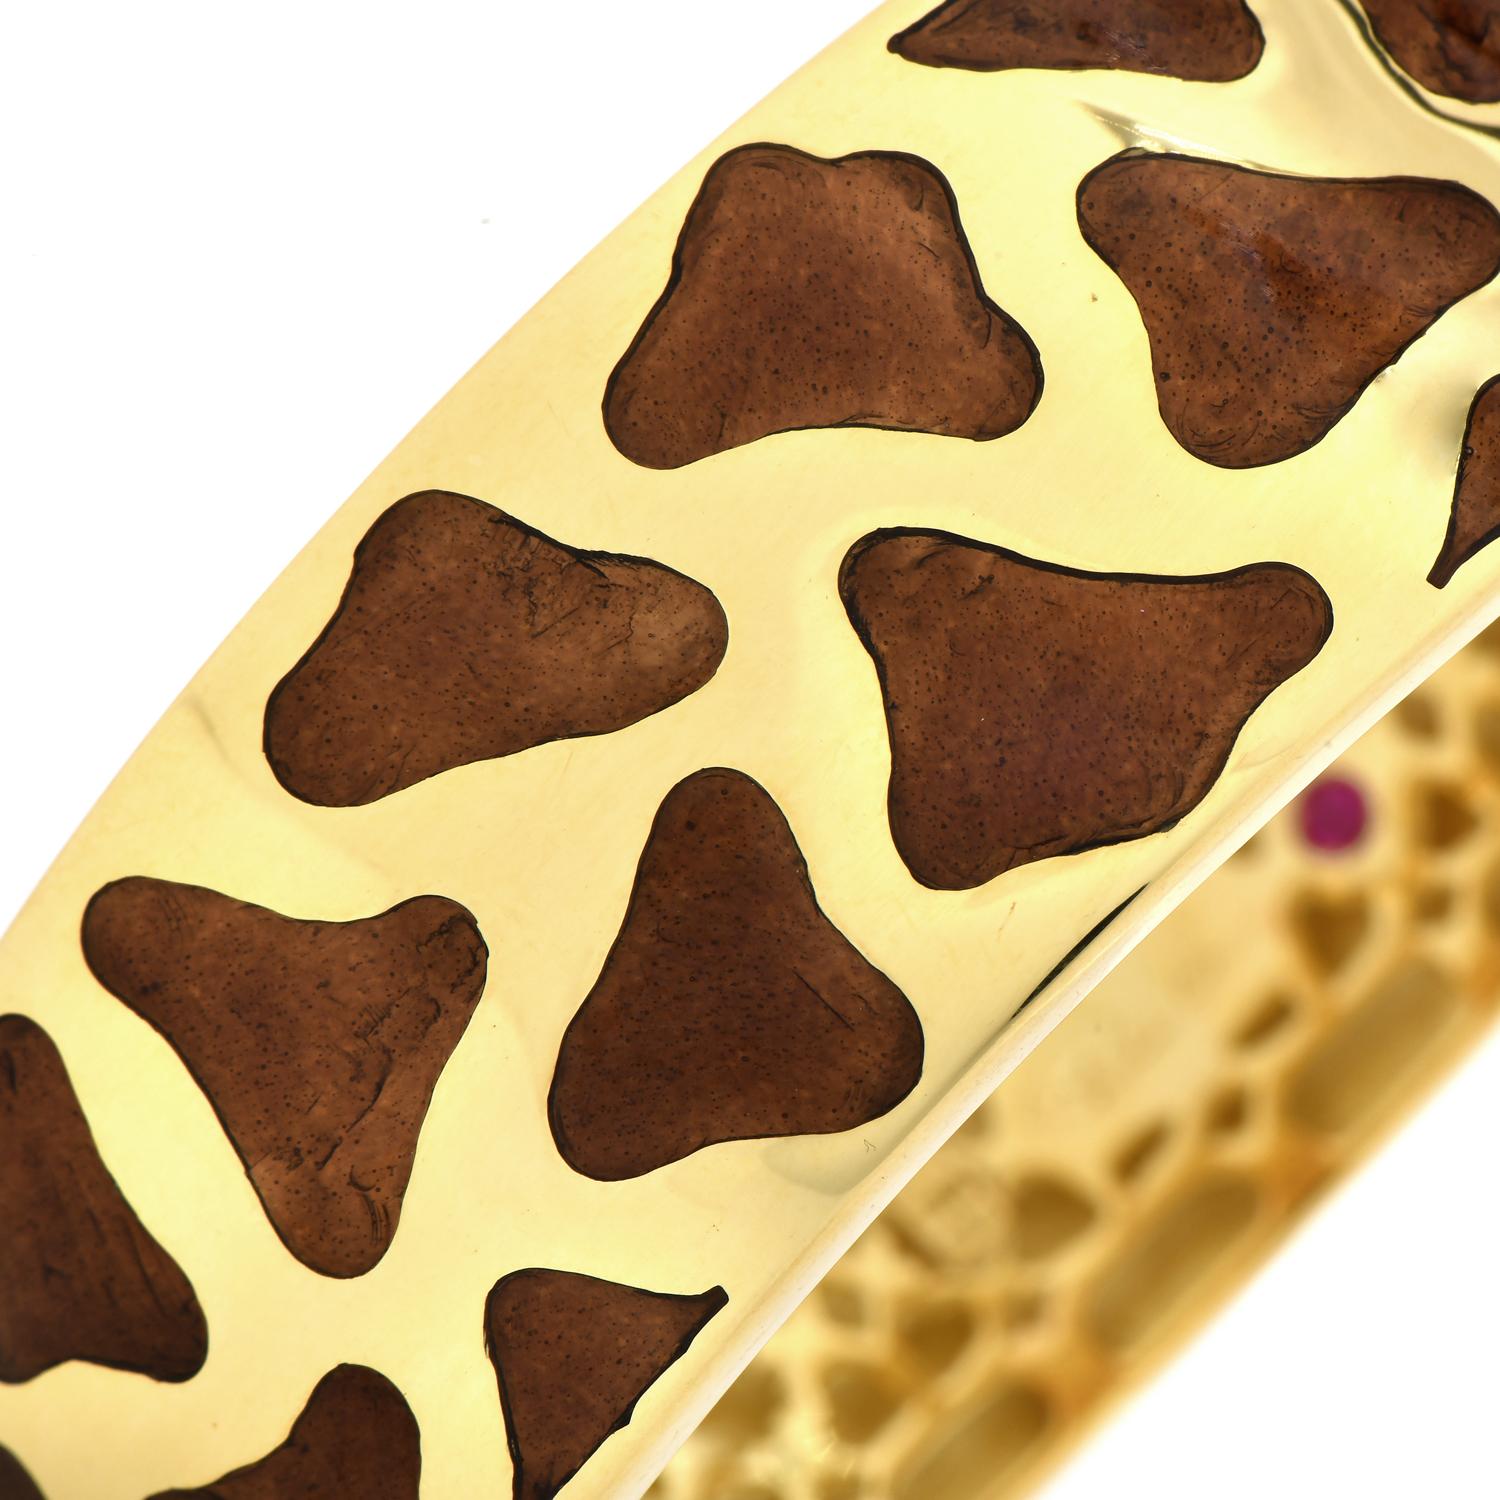 From the House of Roberto Coin, this medium-sized Giraffe Motif bracelet has a beautiful contrast between gold and brown enamel.

All-around graduated bracelet, crafted in solid 18K Yellow Gold, accented with brown enamel.

Secured by an insert